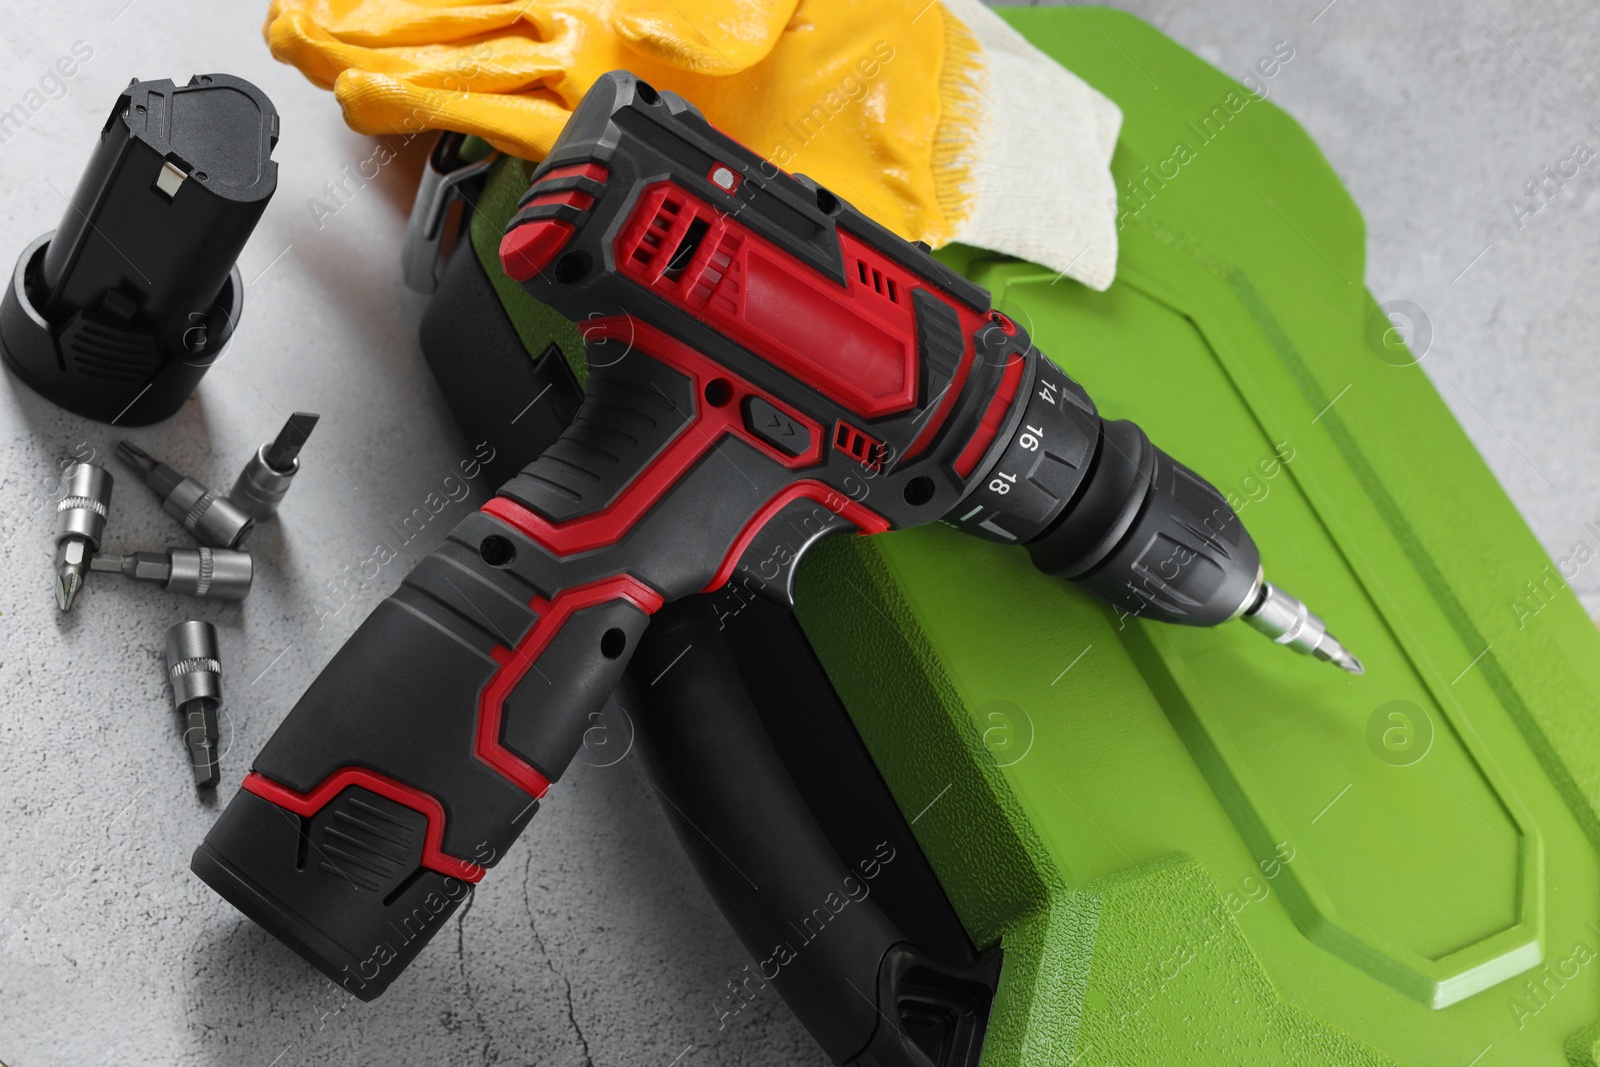 Photo of Electric screwdriver, case, drill bits, battery and gloves on light table, closeup